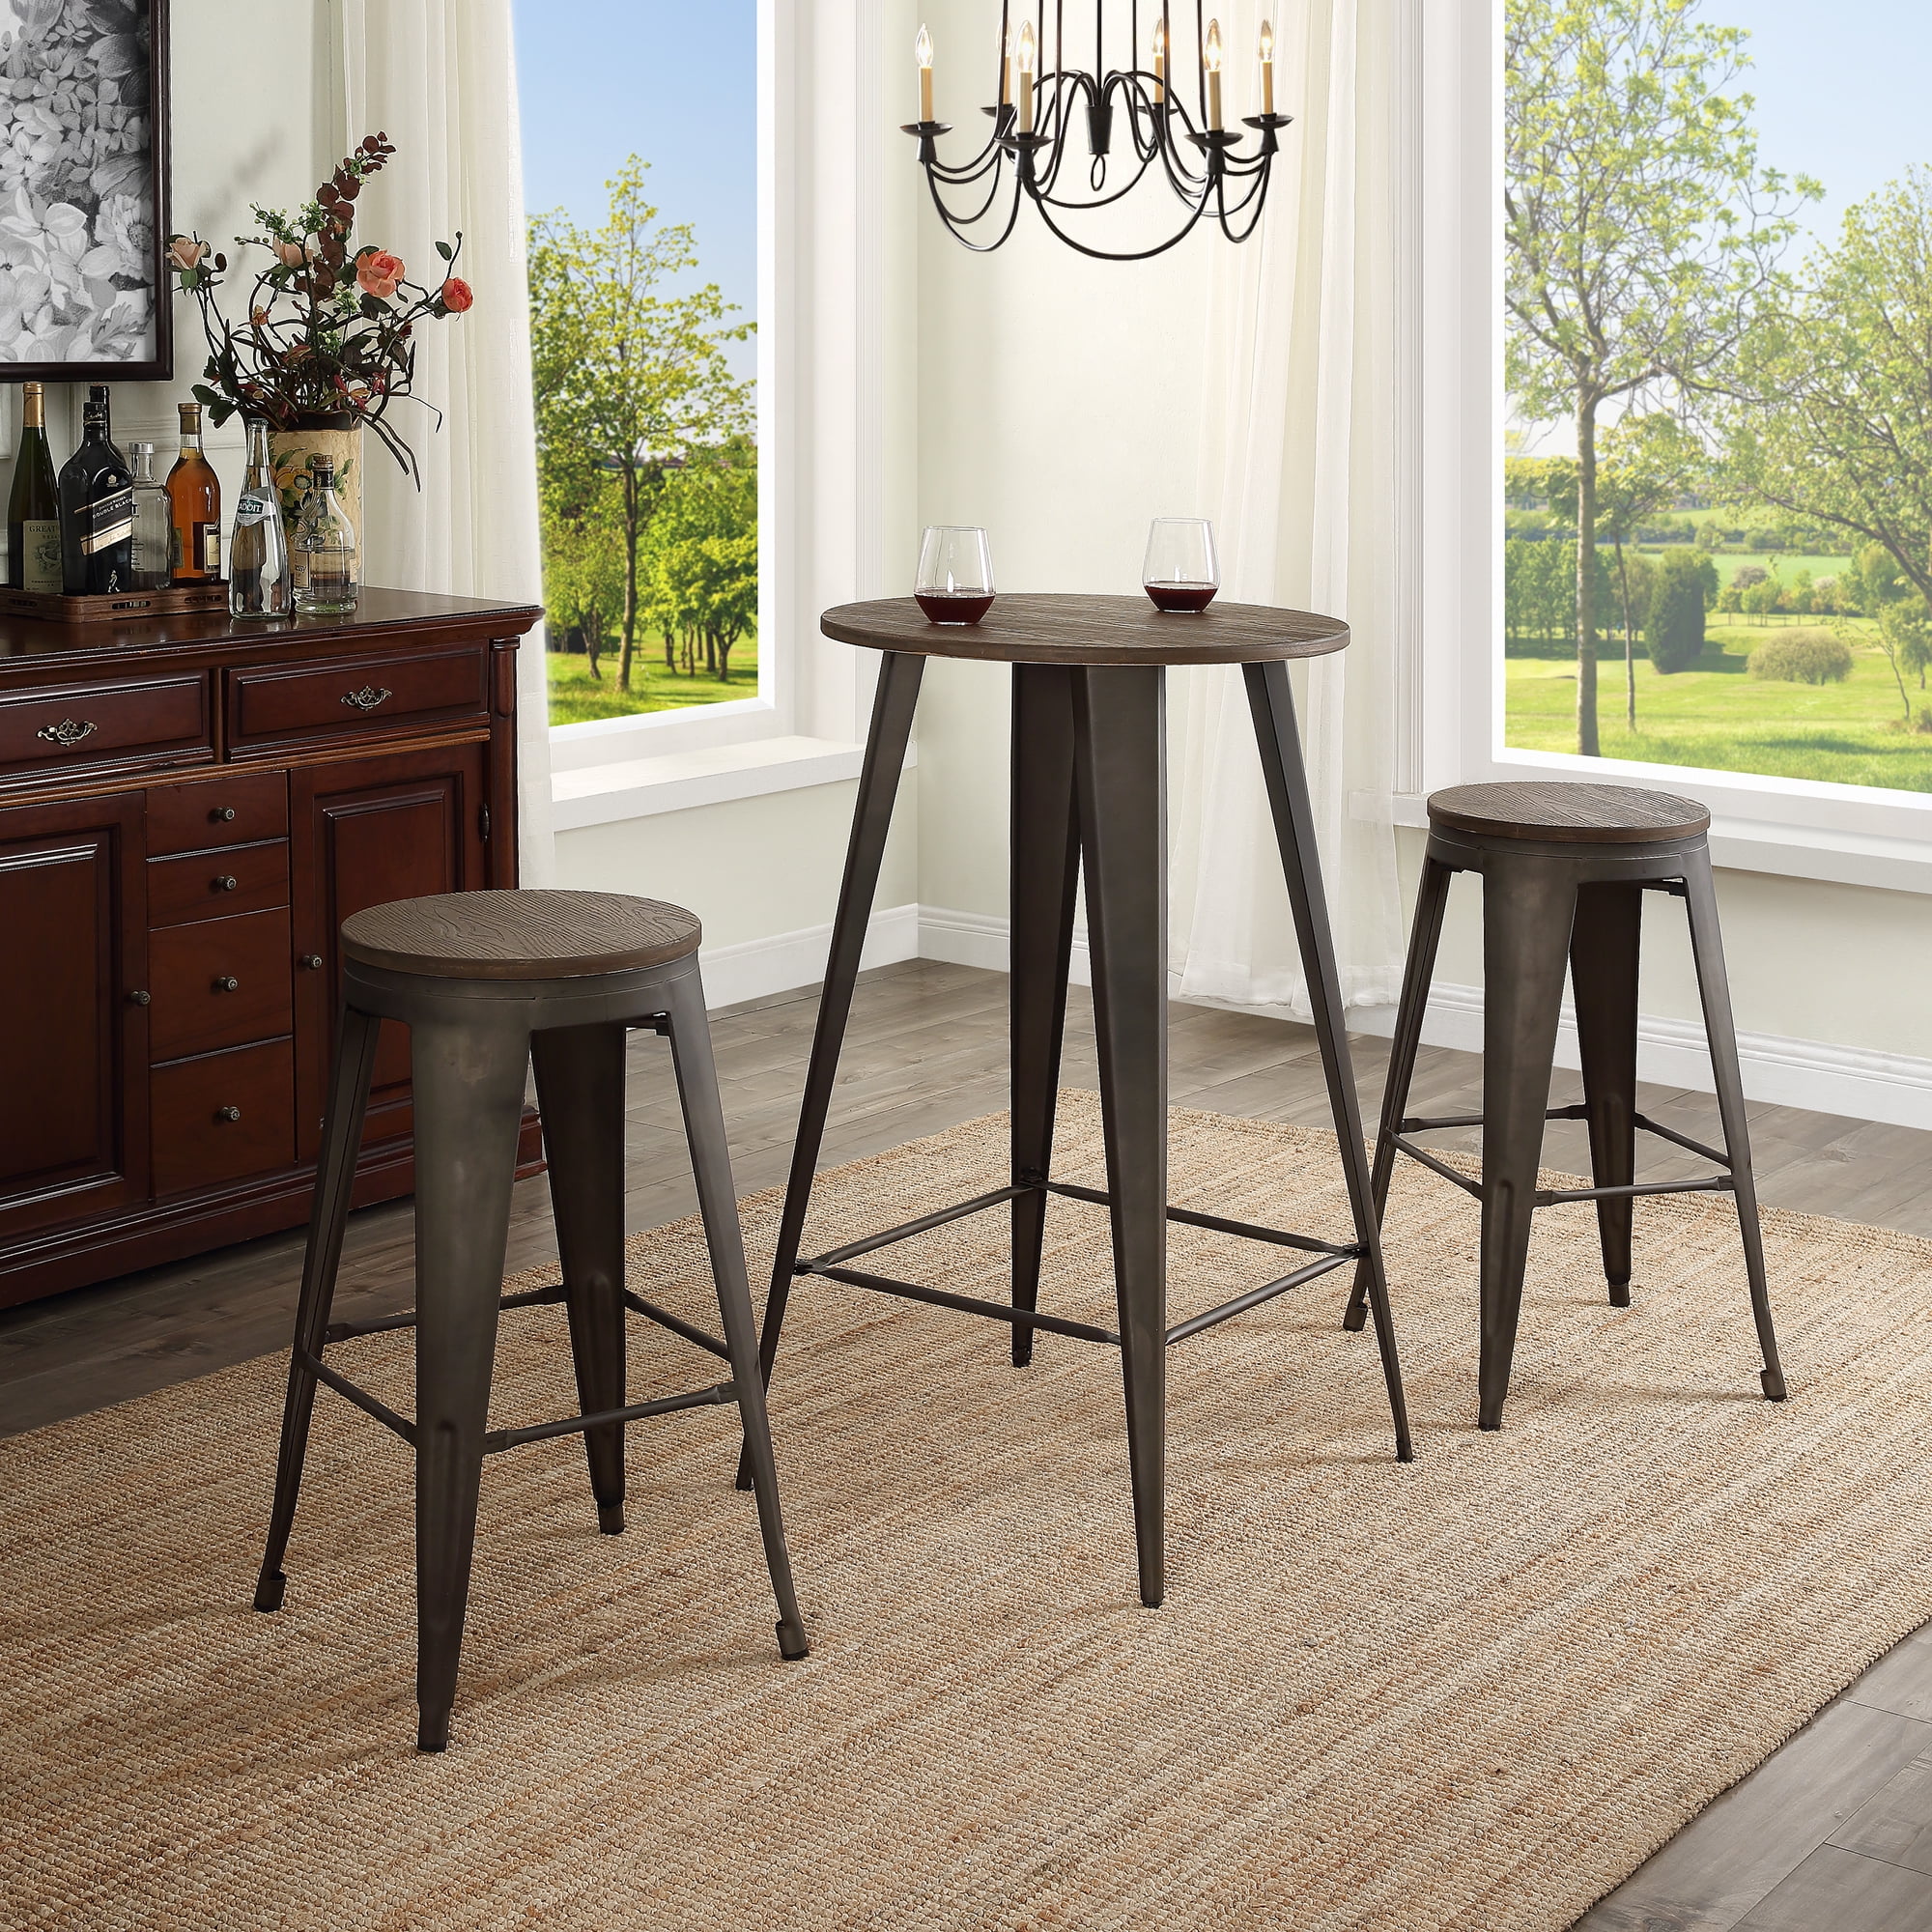 Dining Table Set With 2 Bar Stools, Small Round Bar Height Table And Chairs